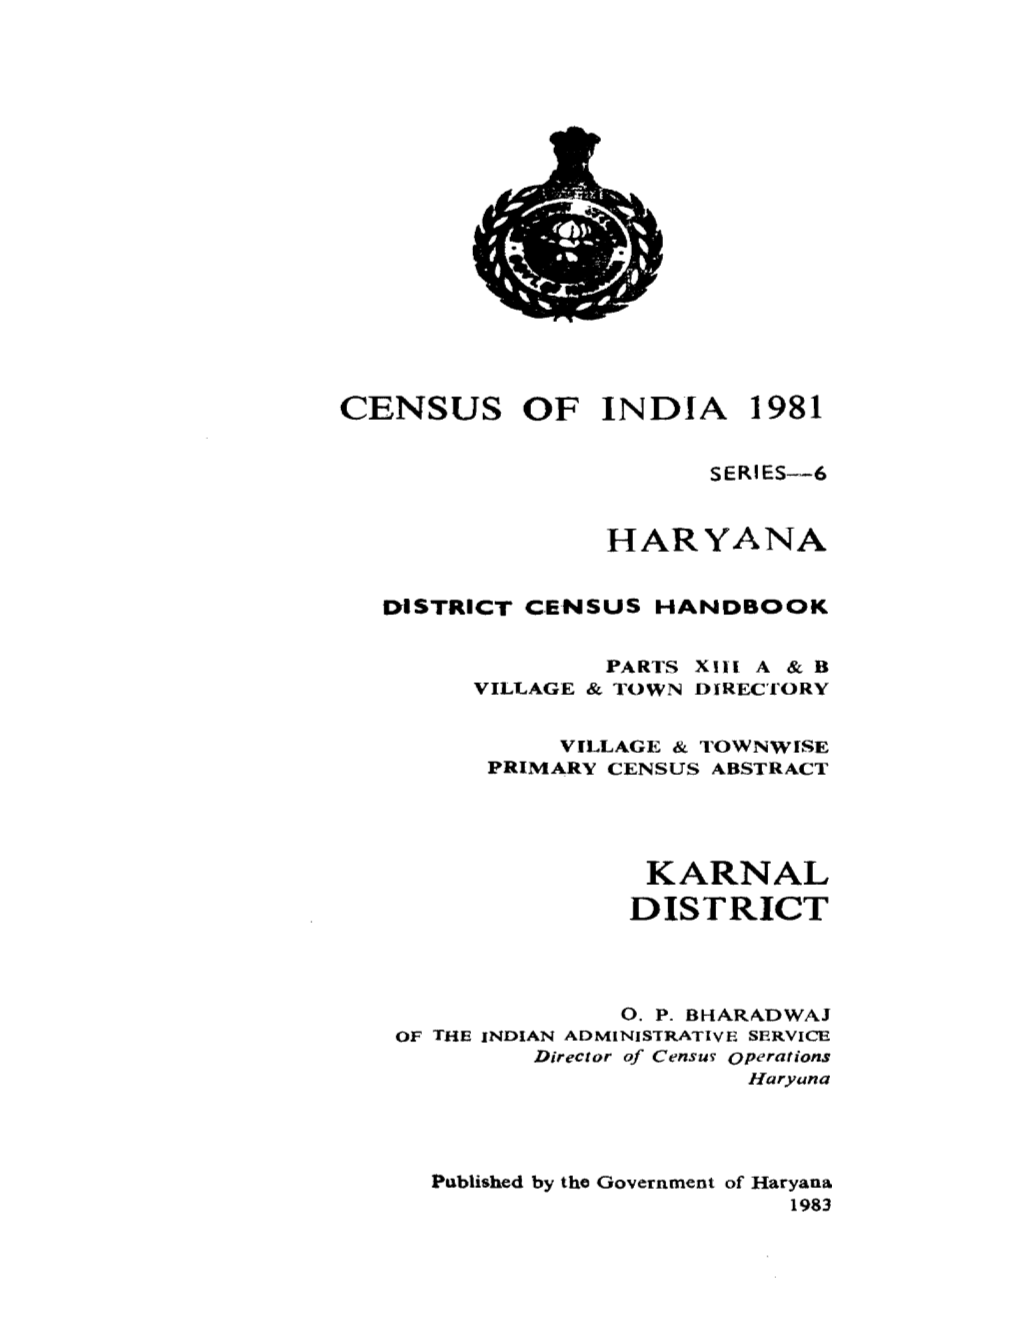 Village & Townwise Primary Census Abstract, Karnal, Parts XIII a & B